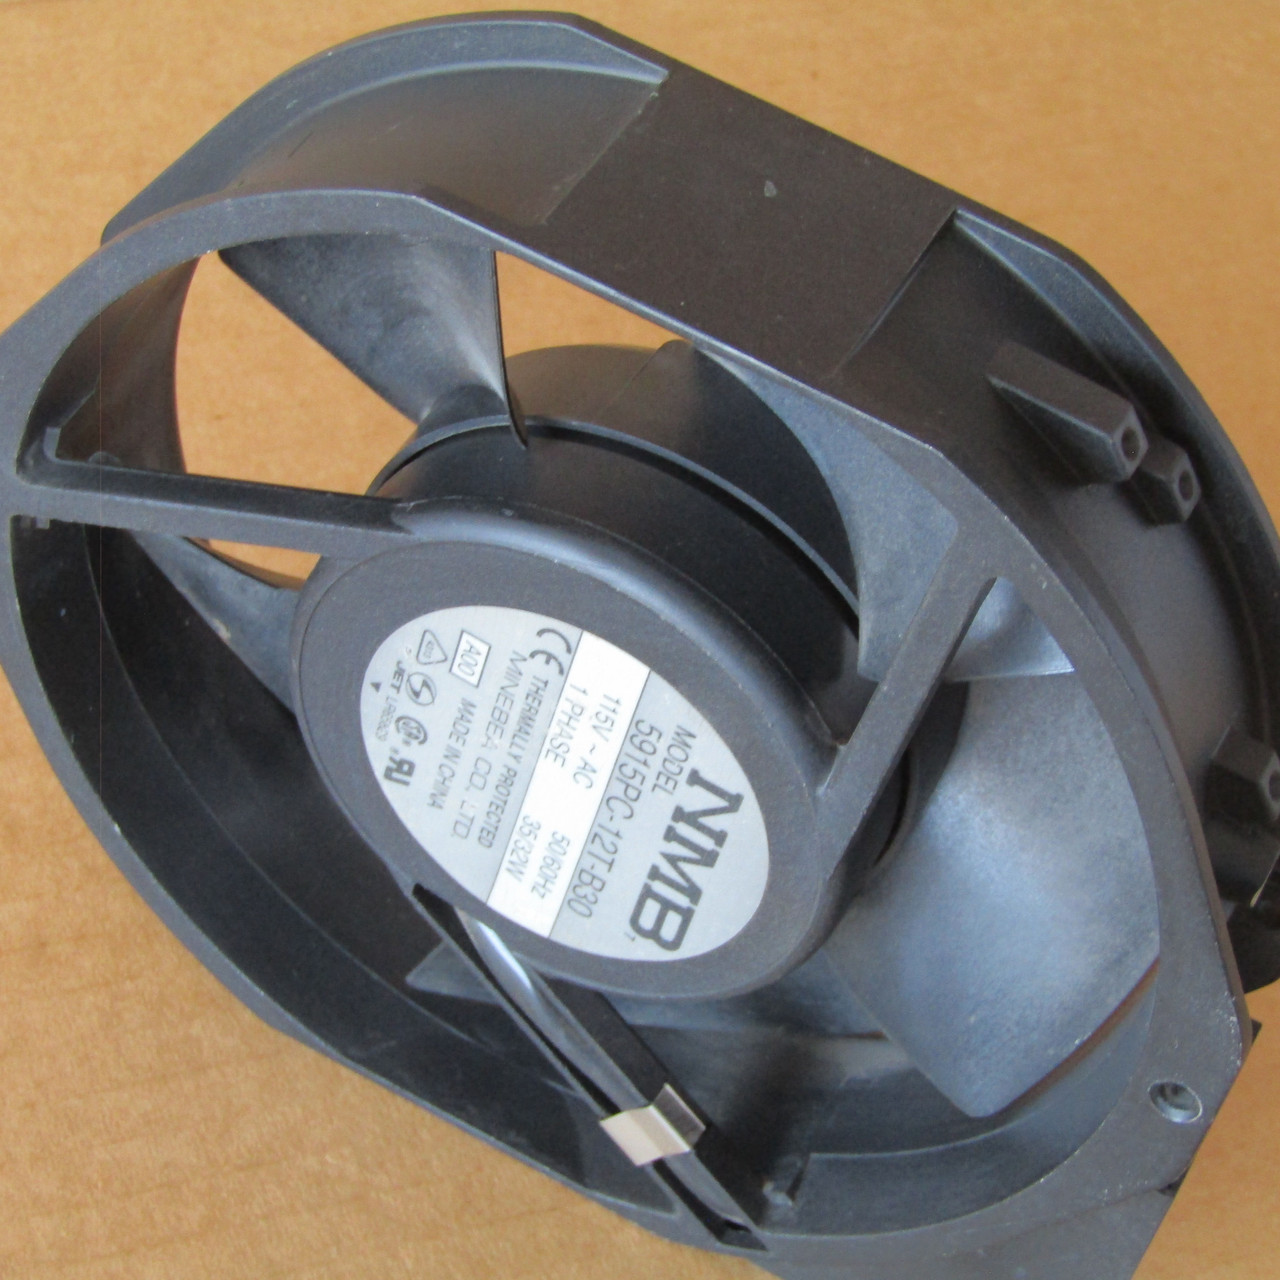 Minebea Co. NMB 5915PC-12T-B30-A00 115VAC Axial Cooling Fan - Used